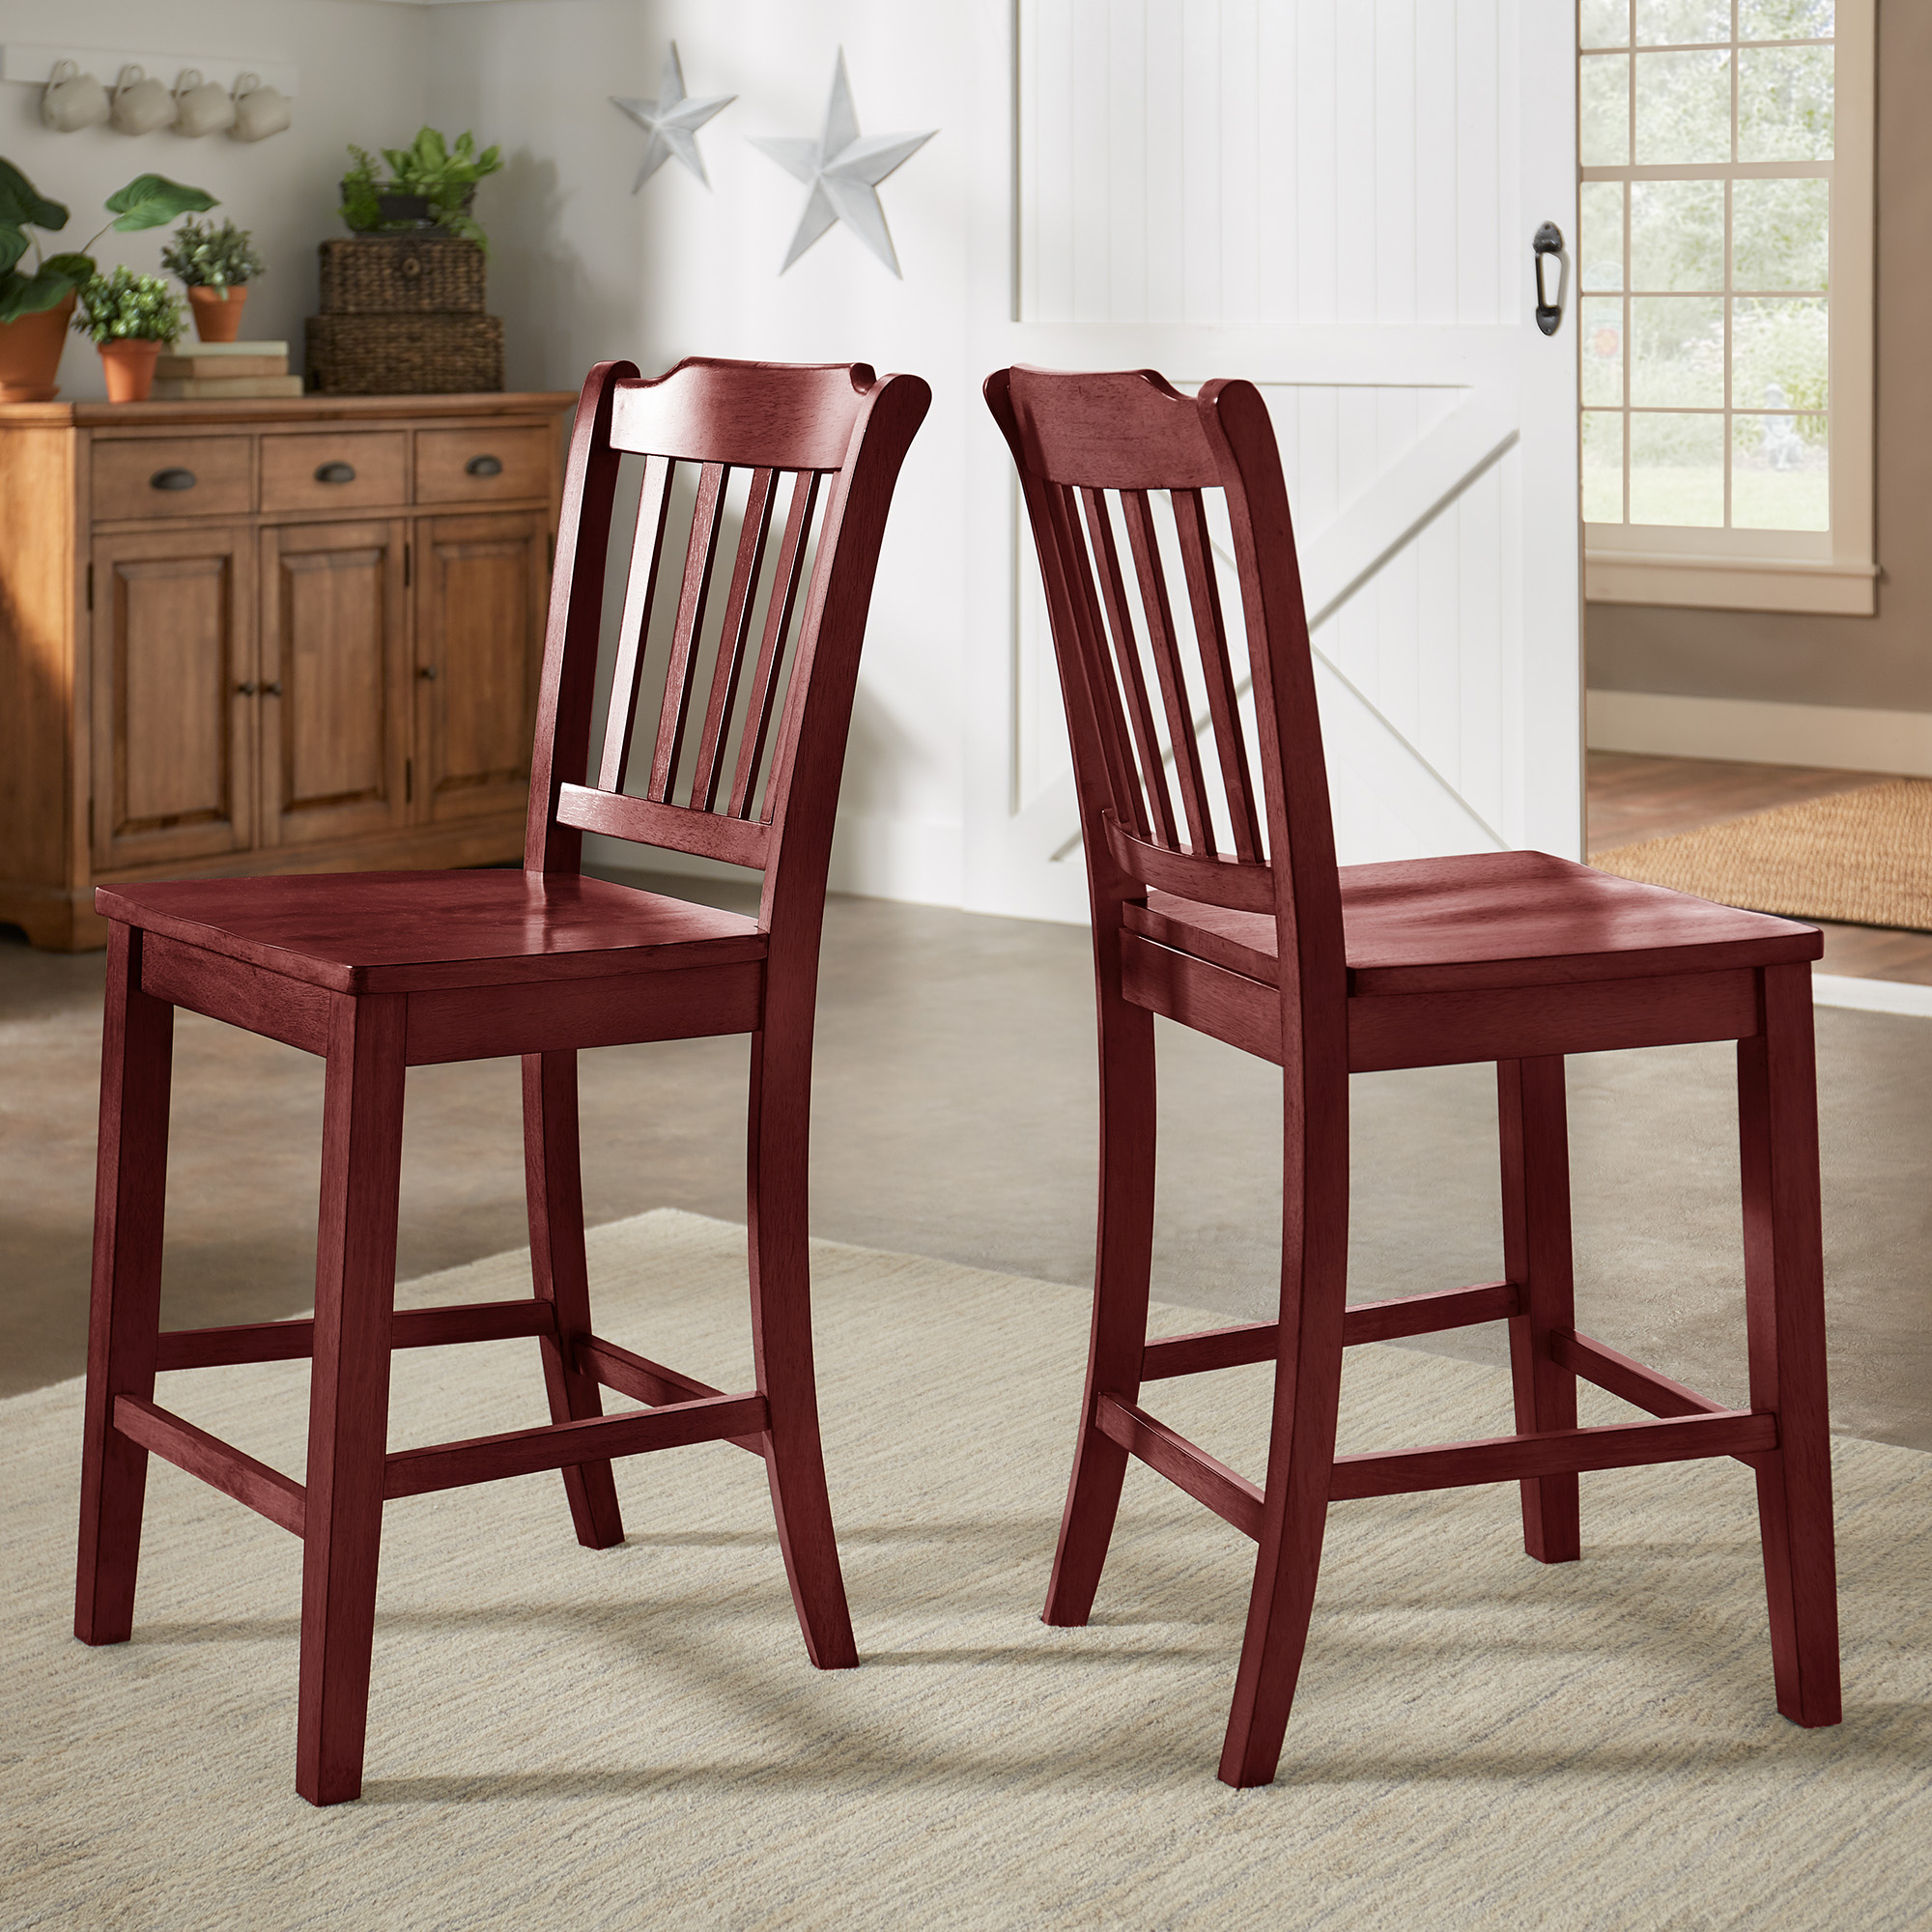 Slat Back Wood Counter Height Chairs (Set of 2)